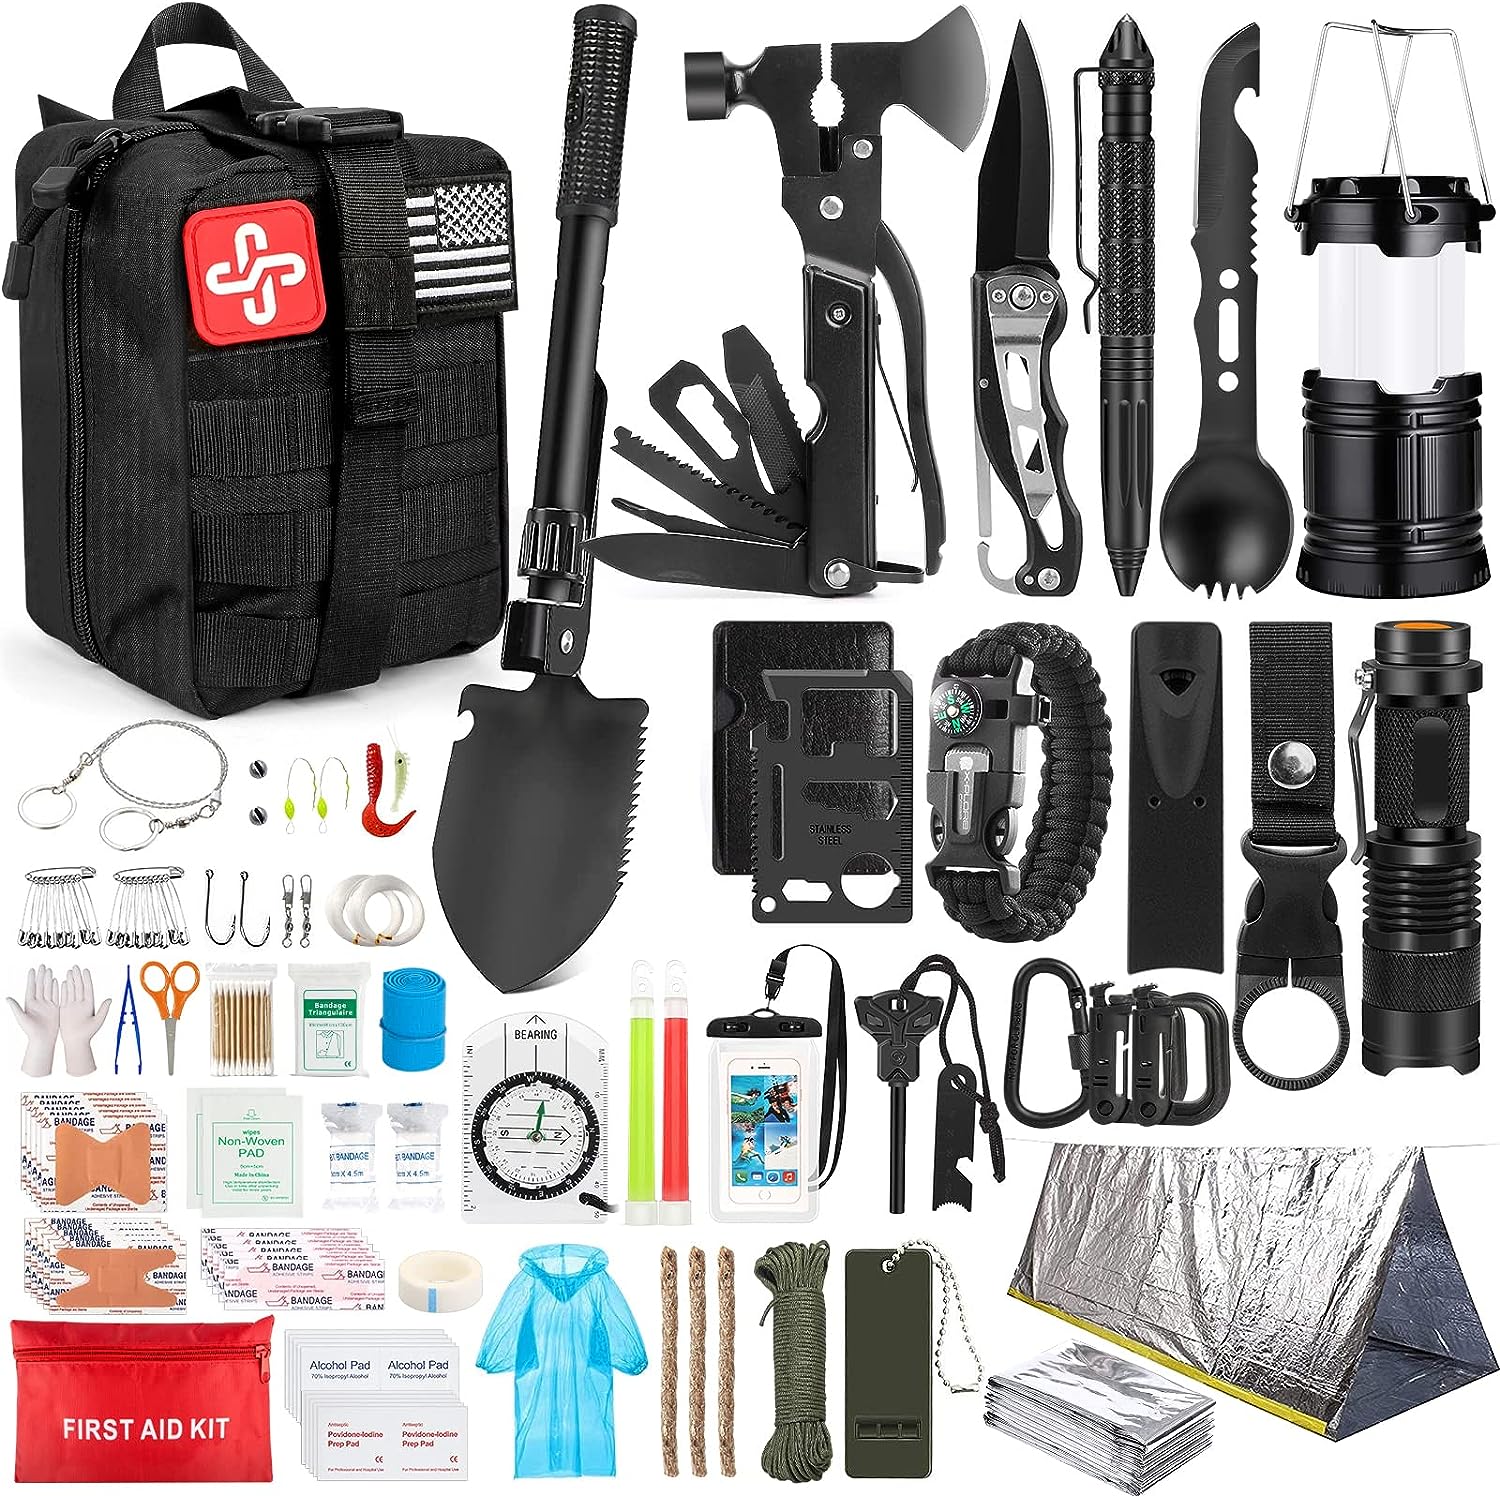 Survival Gear Kit - 250Pcs Survival Gear First Aid Kit with Molle Syst